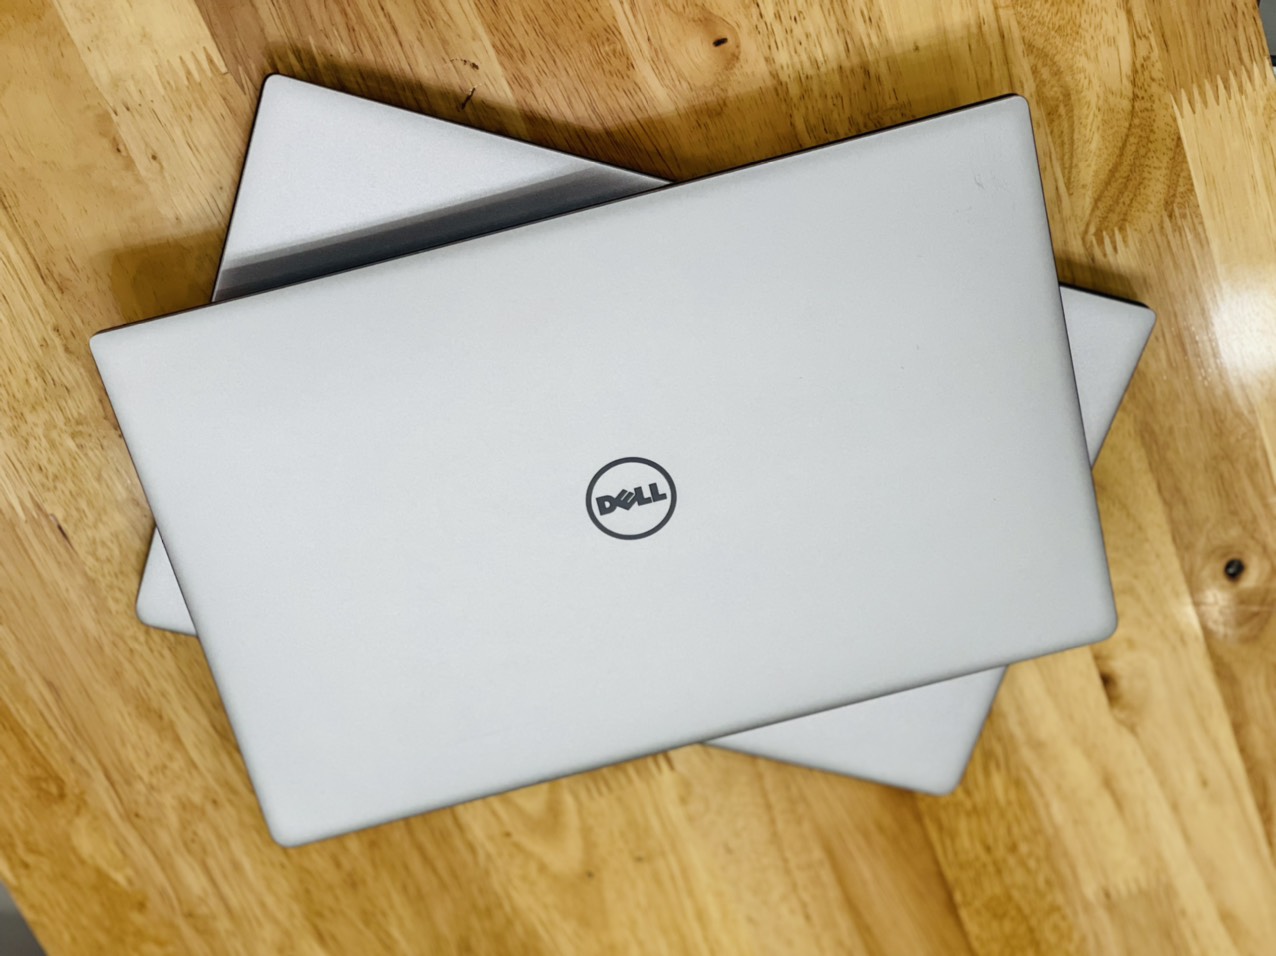 dell xps 9380 giá rẻ